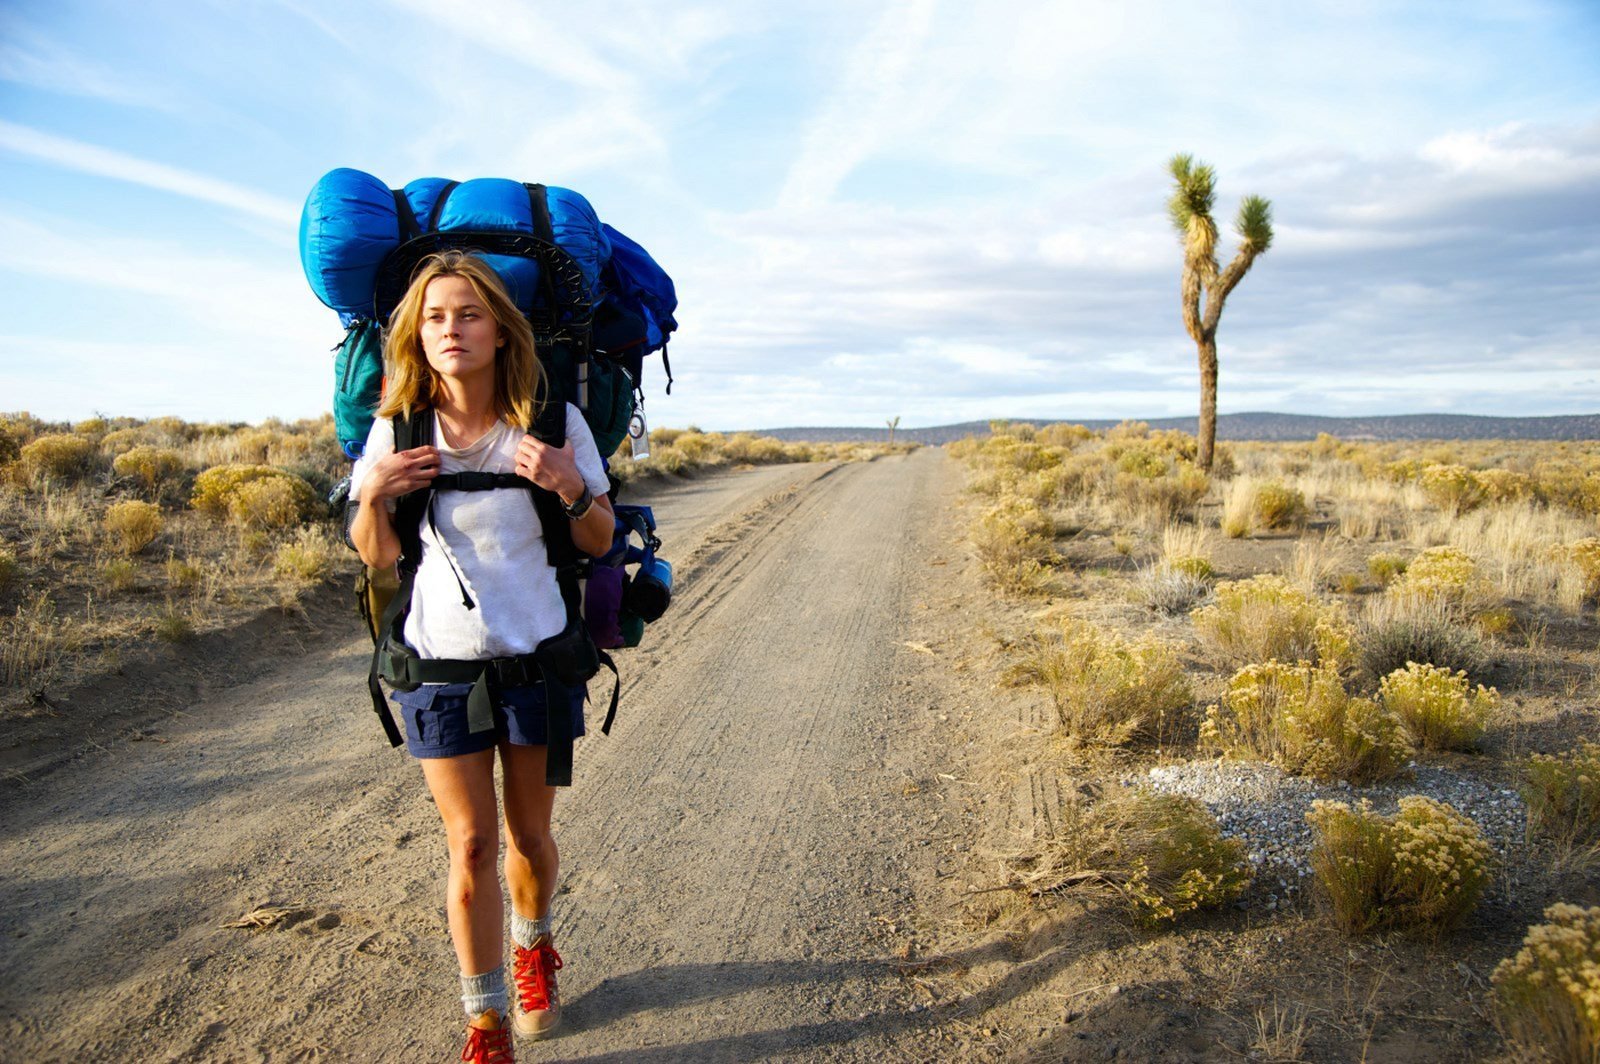 &quot;Wild&quot; is a 2014 American biographical adventure drama film directed by Jean-Marc Vallée and starring Reese Witherspoon, July 18, 2015. (Shutterstock Photo)